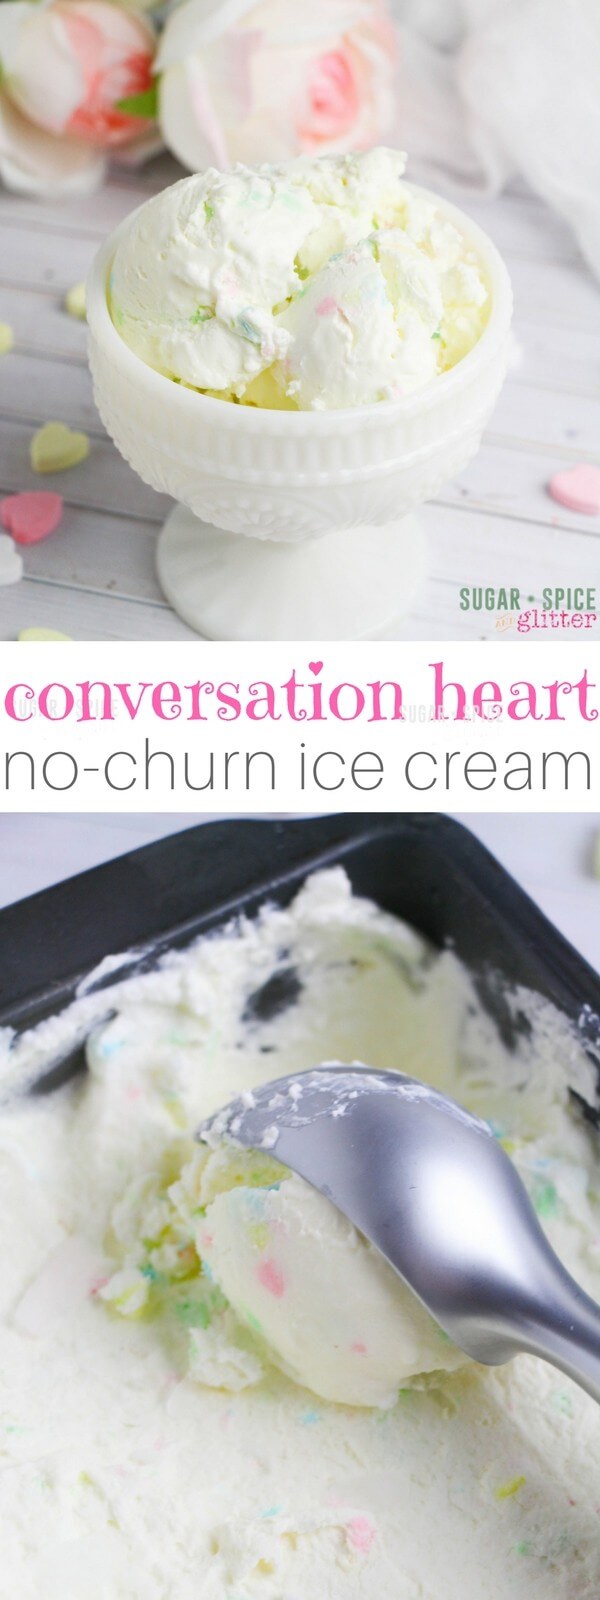 A sweet and creamy Valentine's Day dessert using conversation hearts for a cute, pastel-flecked effect. This easy no-churn ice cream recipe takes less than 5 minutes to whip up and can be enjoyed in just 2 hours